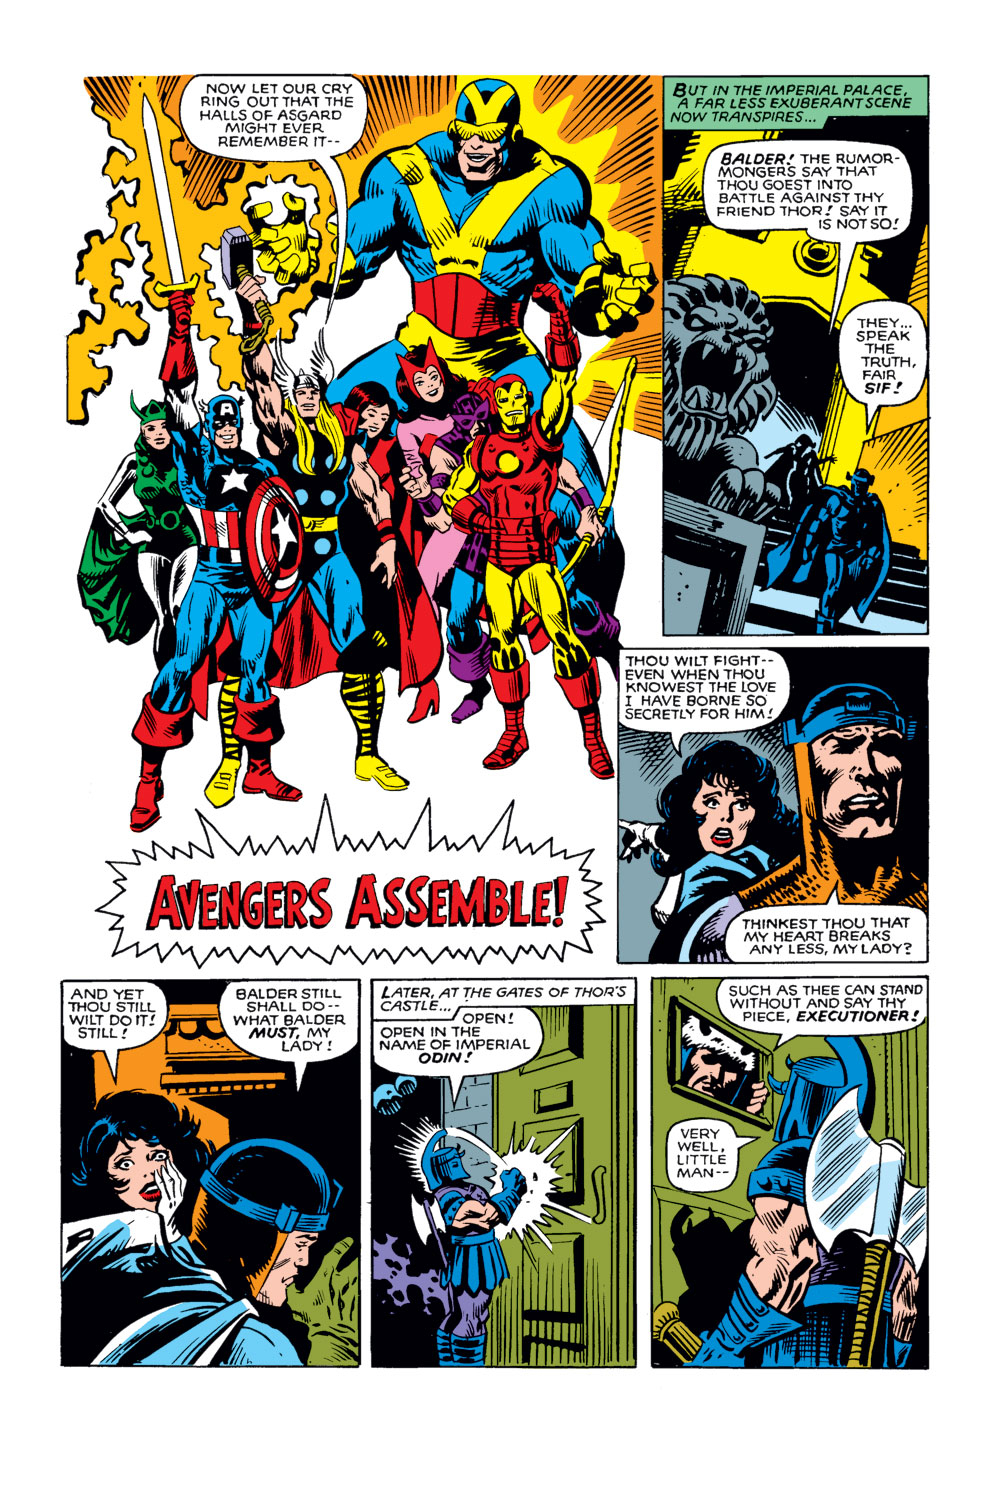 What If? (1977) issue 25 - Thor and the Avengers battled the gods - Page 14